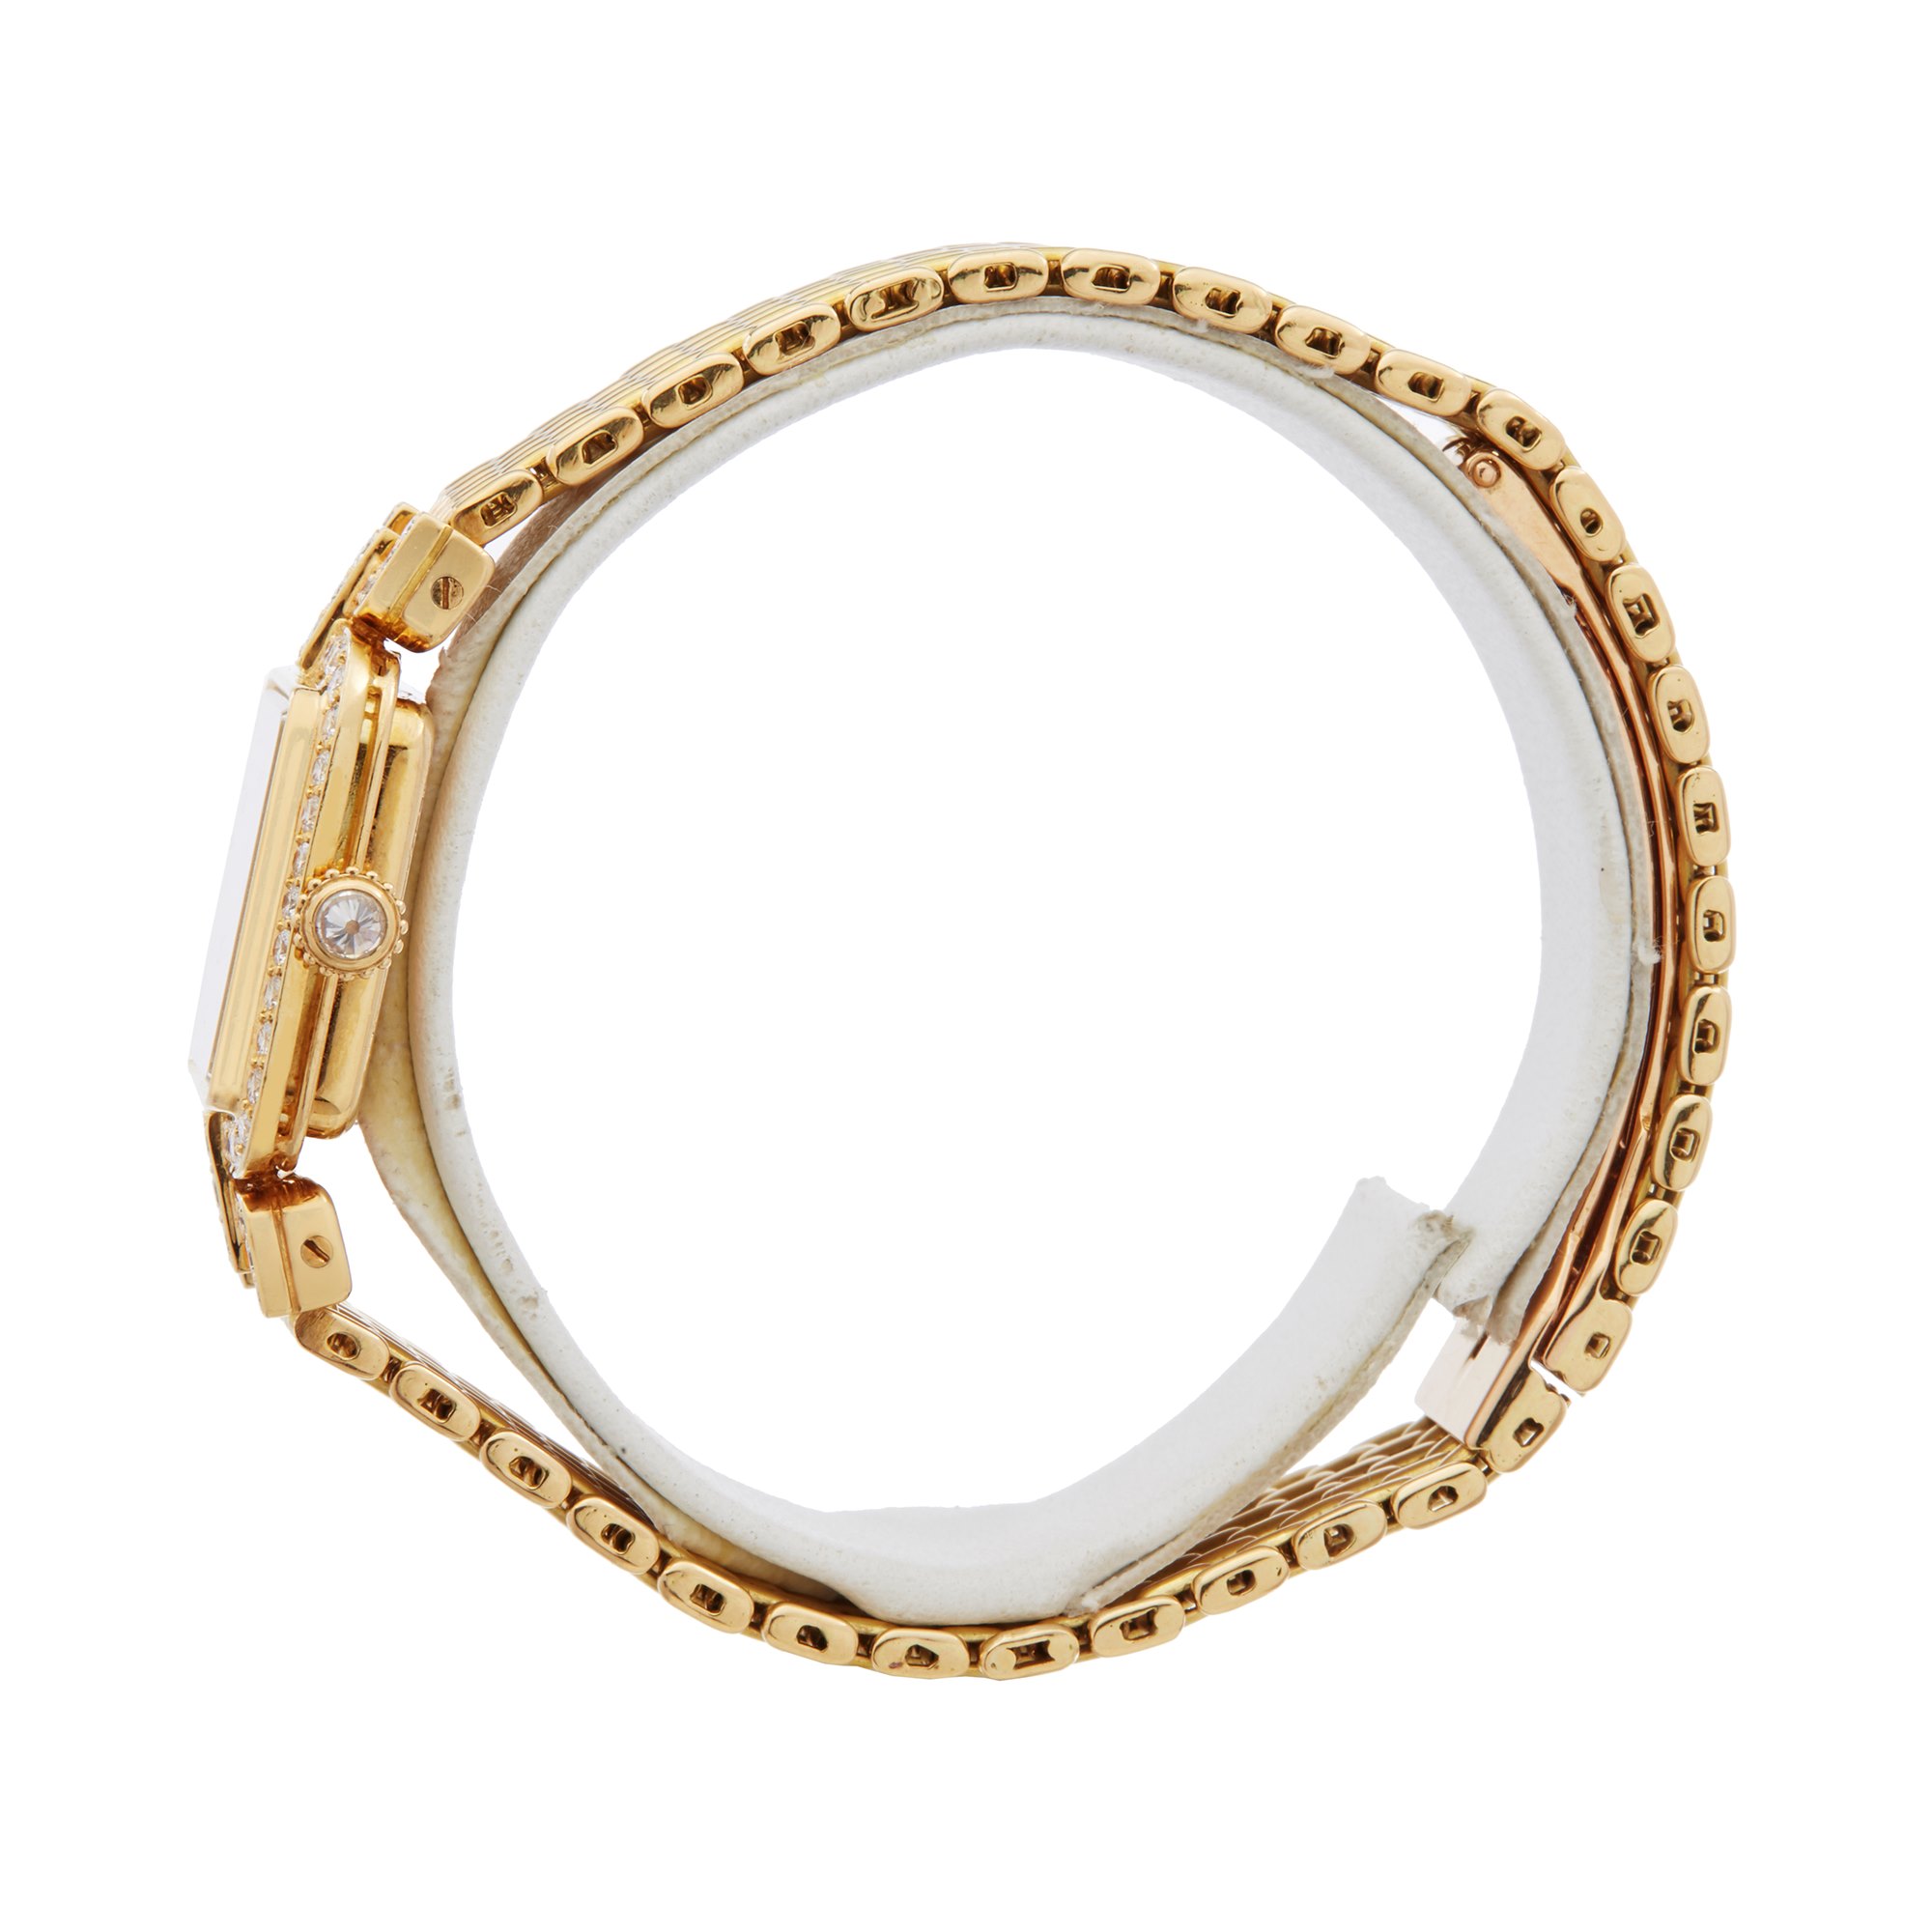 Cartier Sonate Paris Diamond Yellow Gold - 8914000 or 8035 Yellow Gold 8914000 or 8035